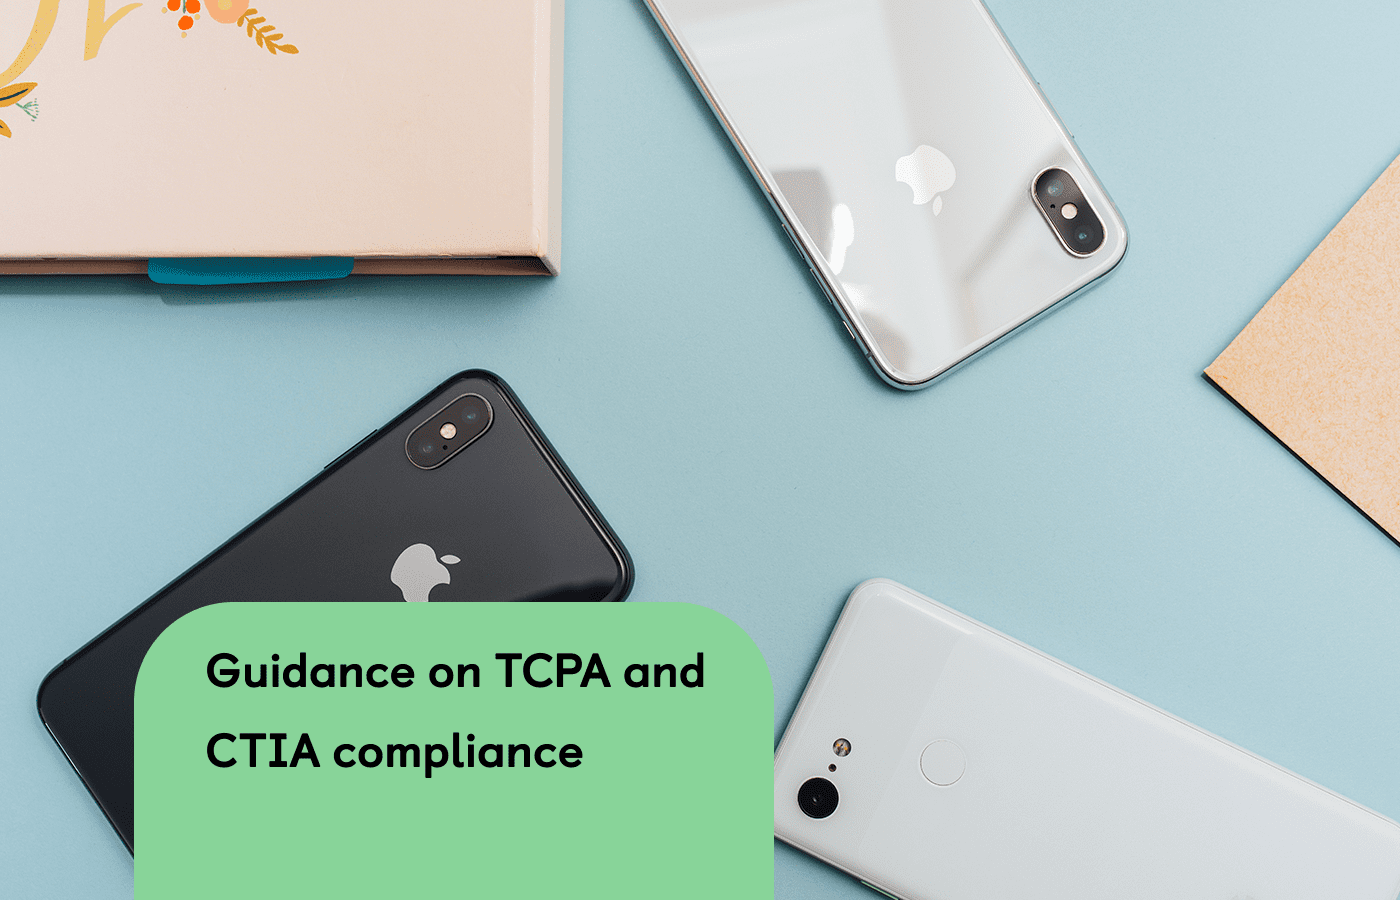 Firepush SMS guidance: TCPA and CTIA compliance for Shopify stores 